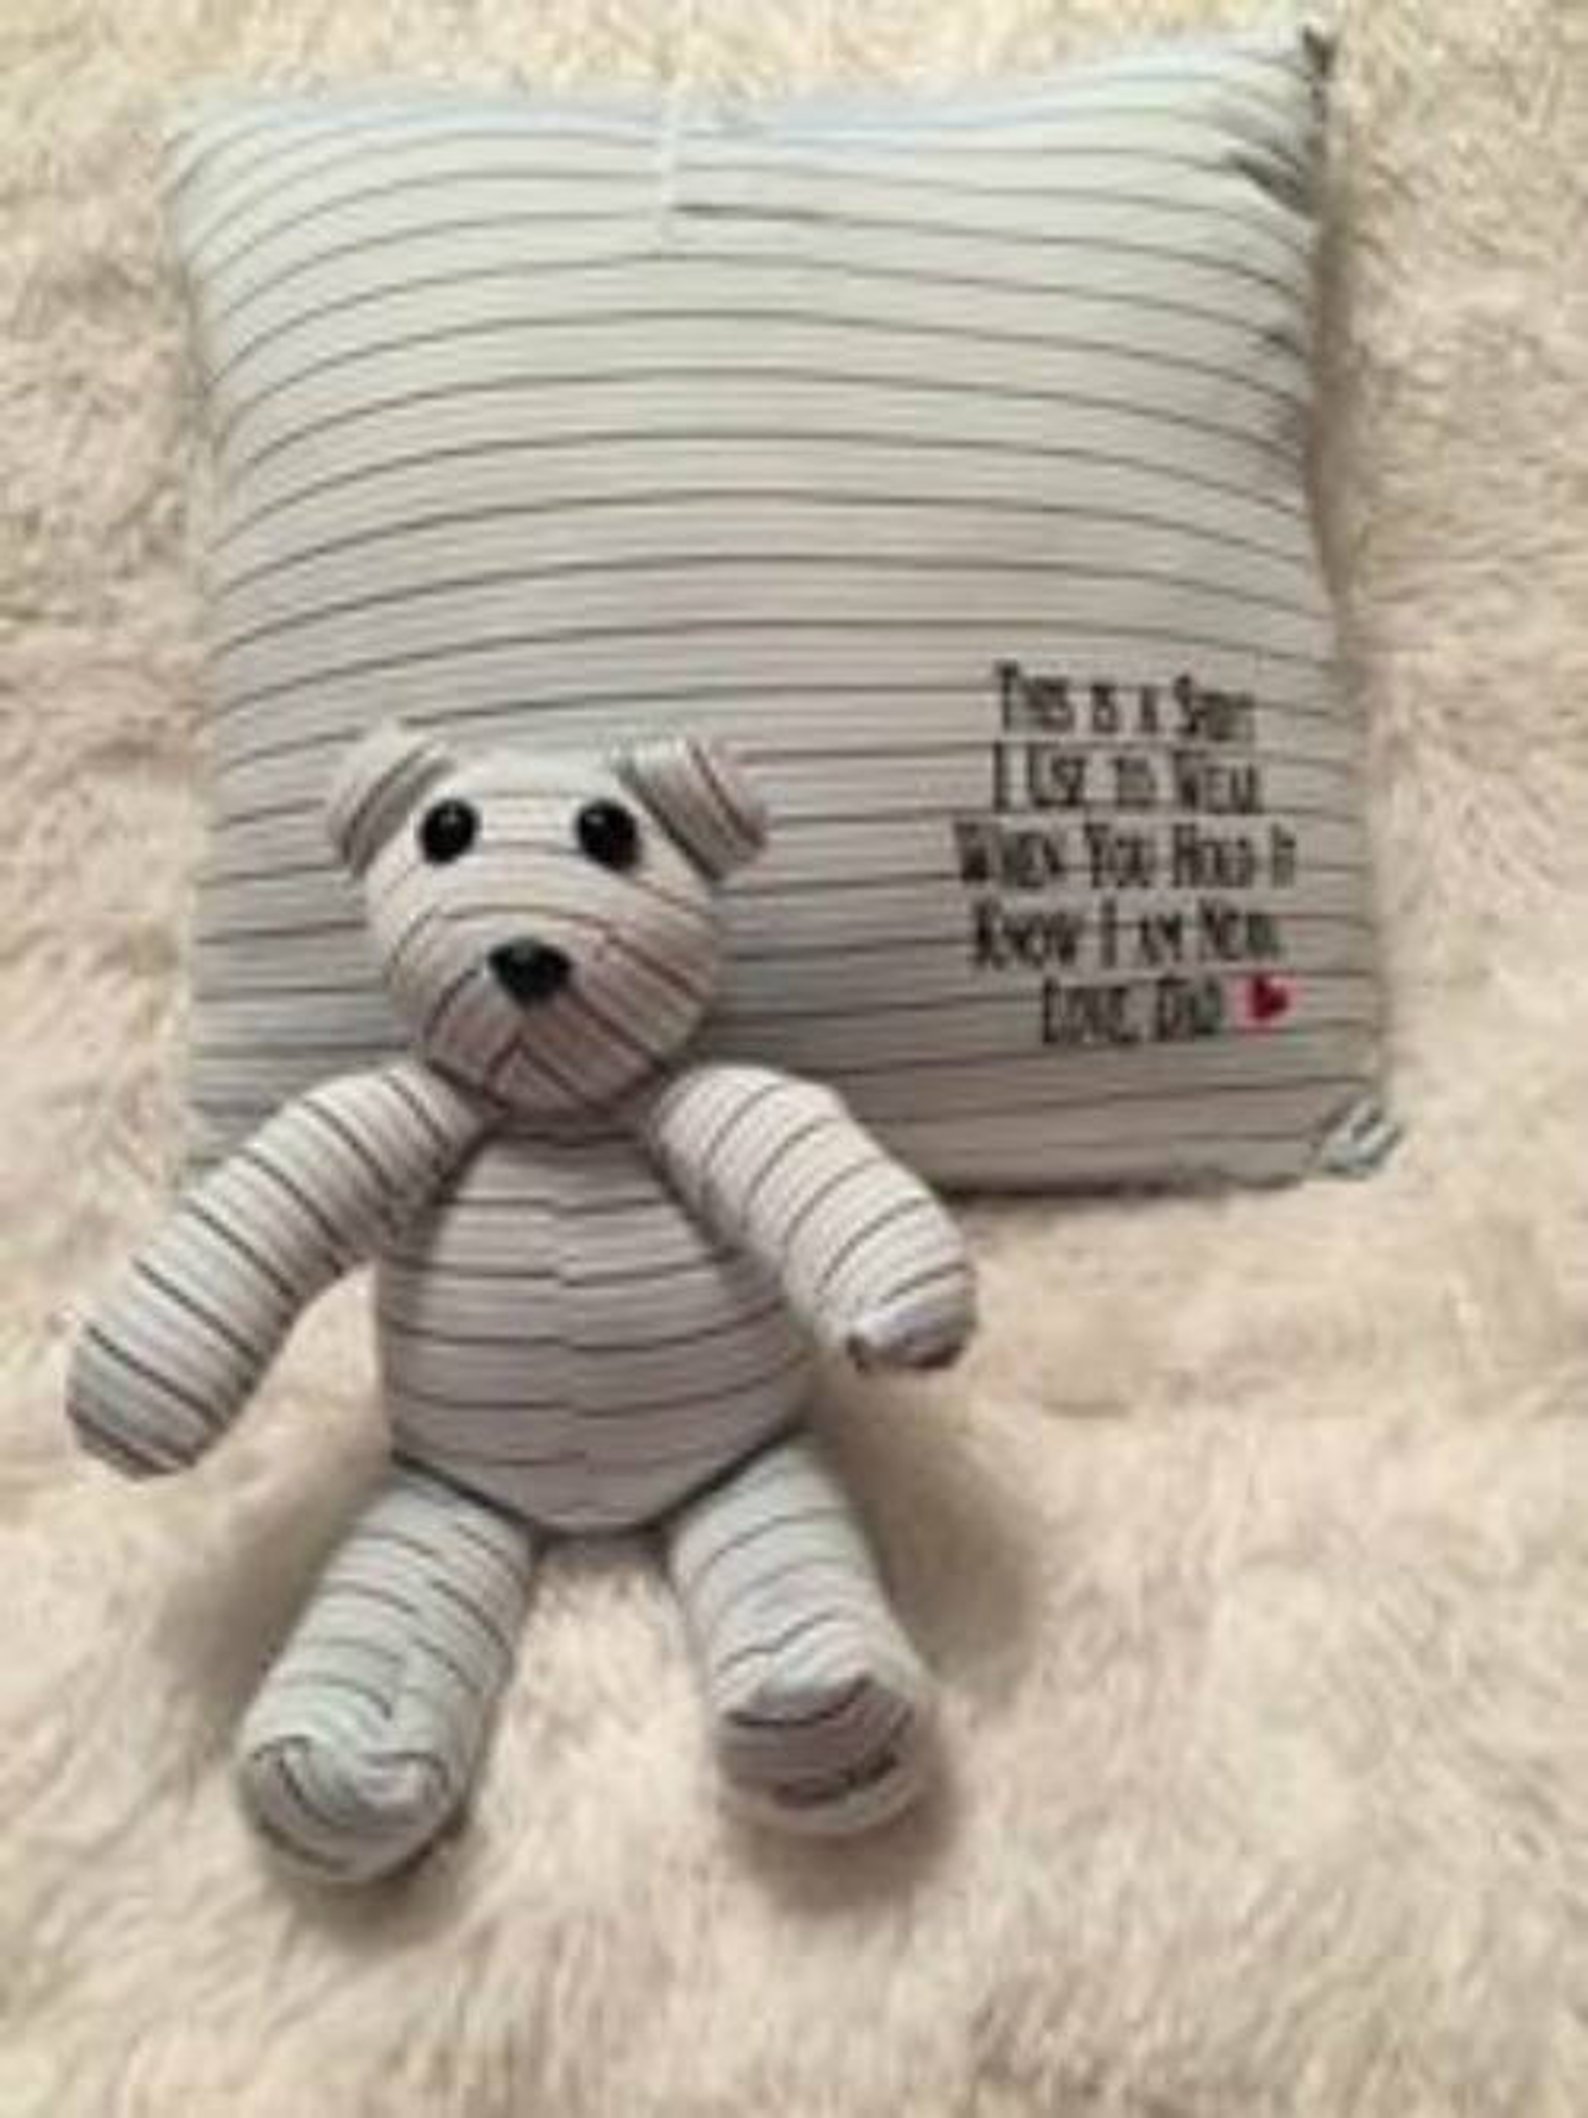 teddy bear made from baby onesie